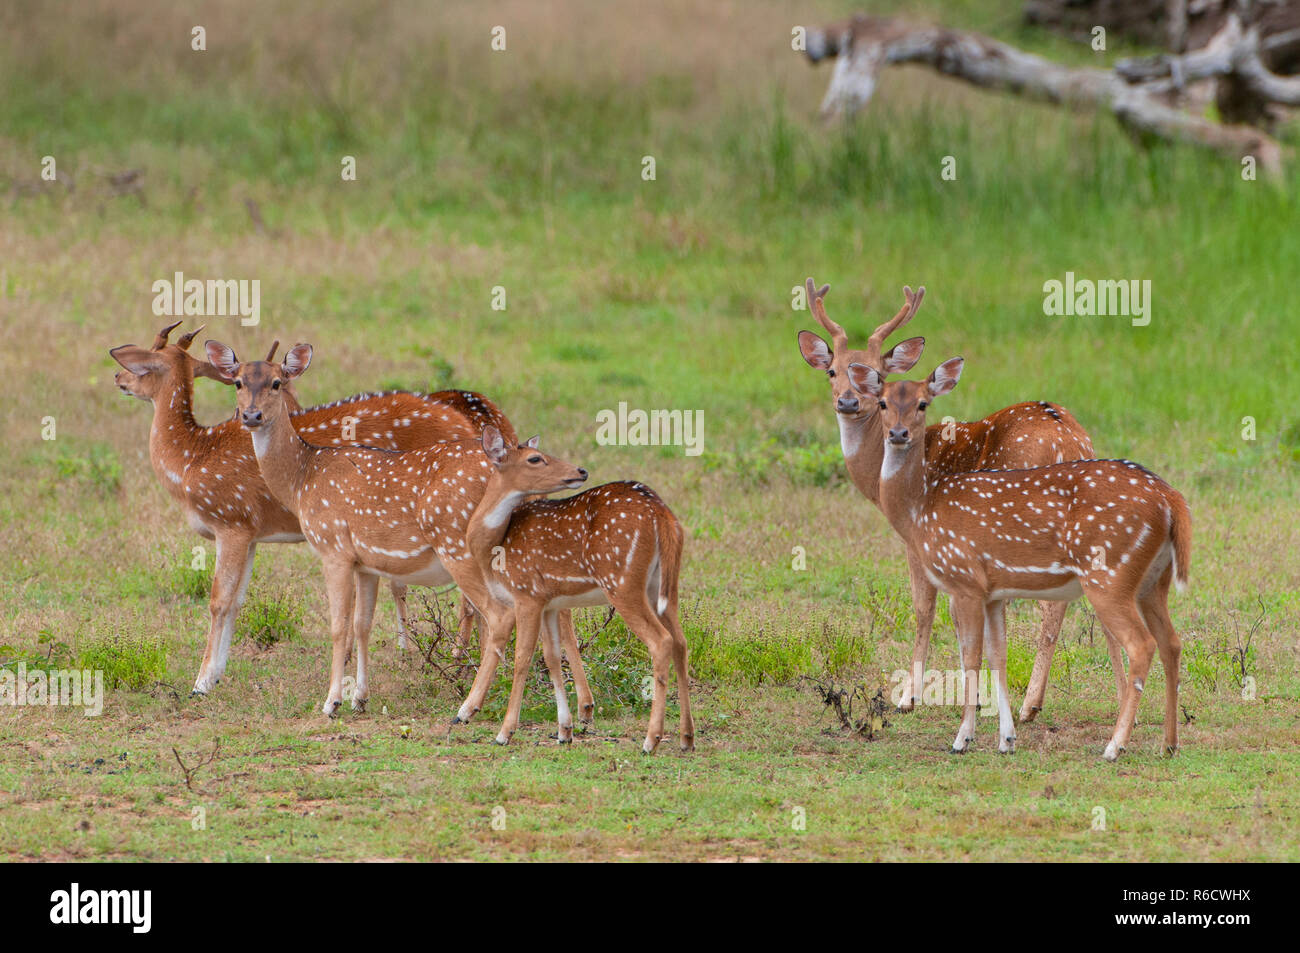 The Chital Or Cheetal (Axis Axis), Also Known As Spotted Deer Or Axis Deer, Yala National Park, Sri Lanka Stock Photo